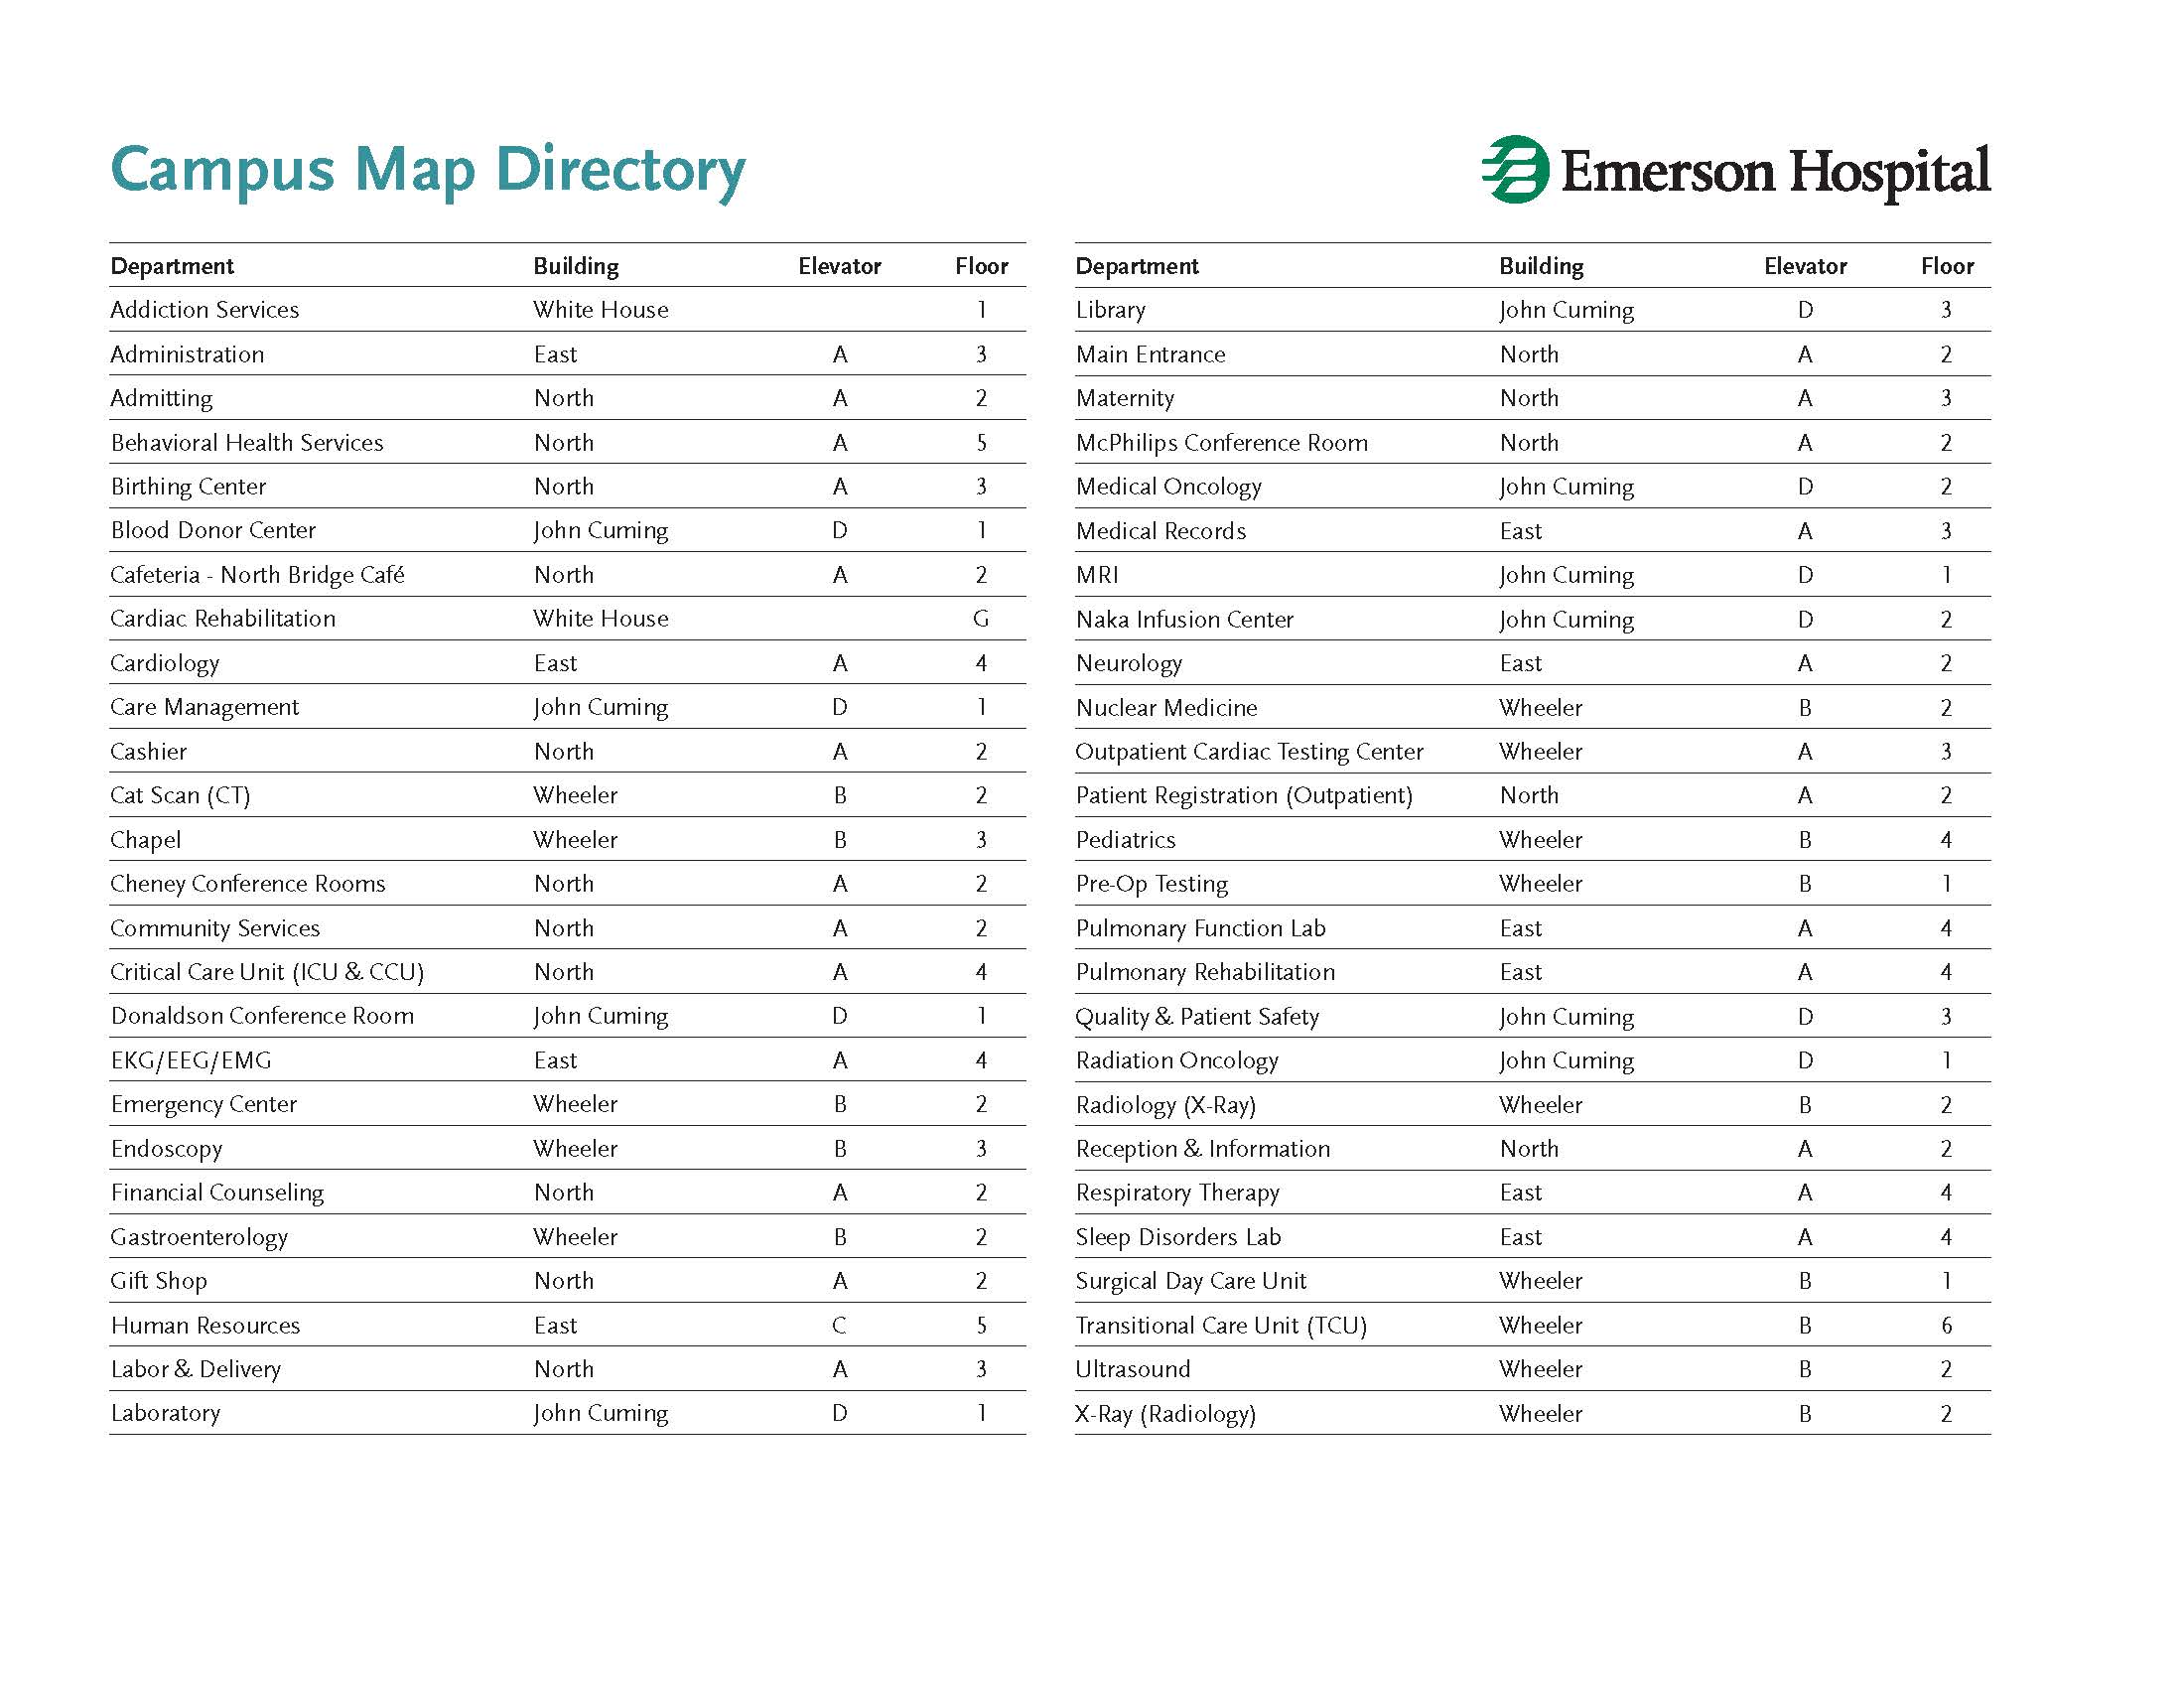 Emerson Hospital Campus Map Directory